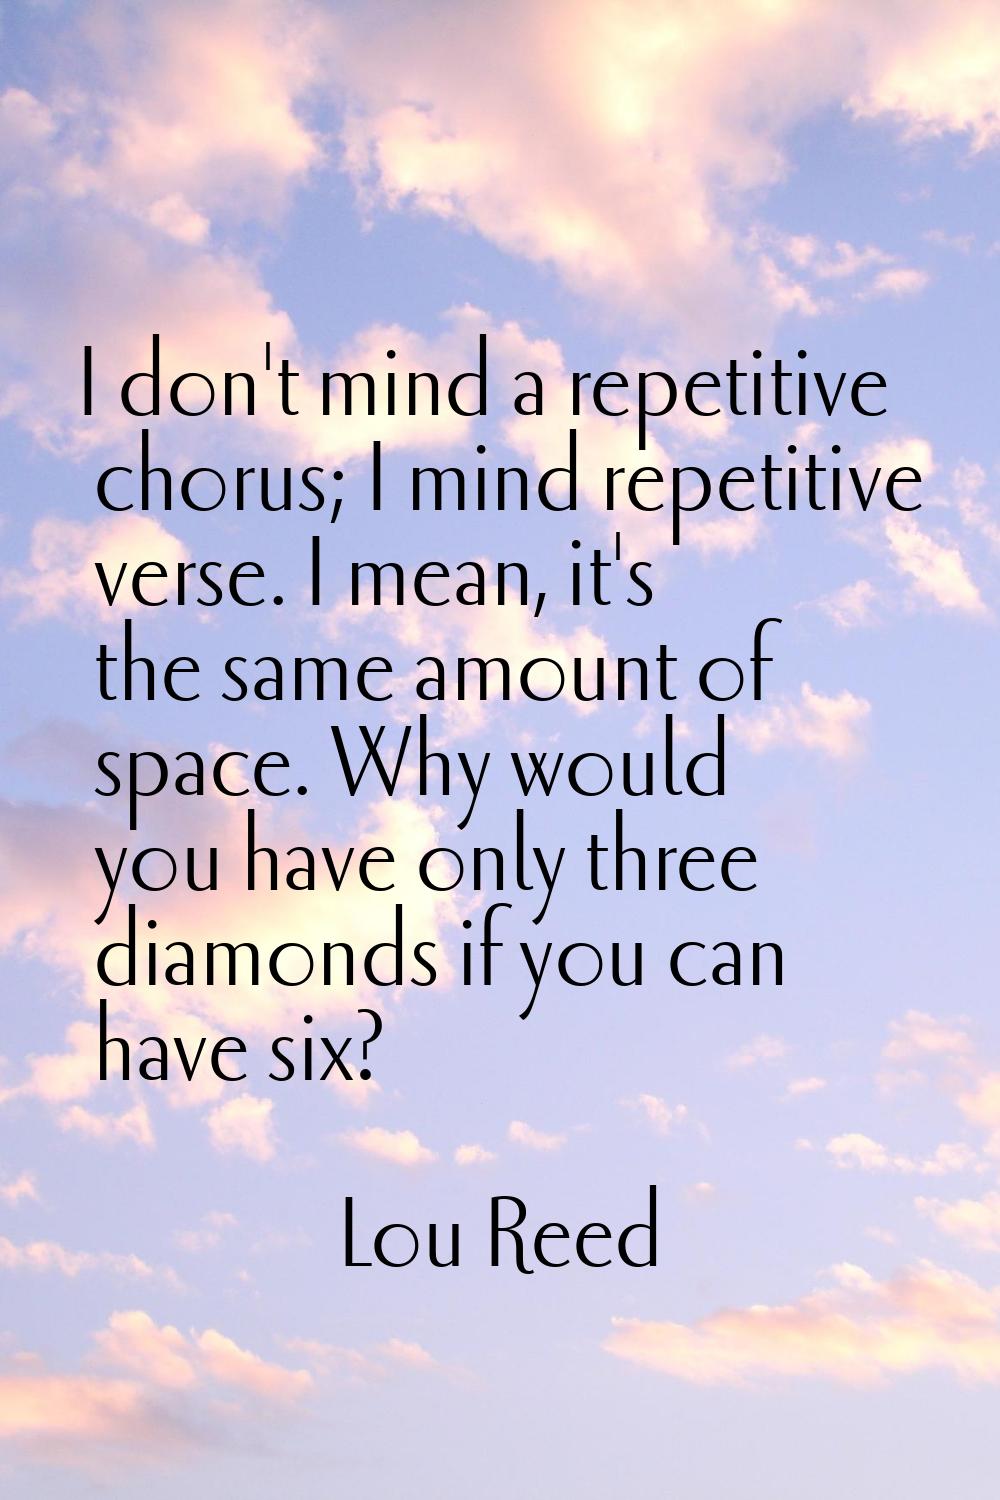 I don't mind a repetitive chorus; I mind repetitive verse. I mean, it's the same amount of space. W